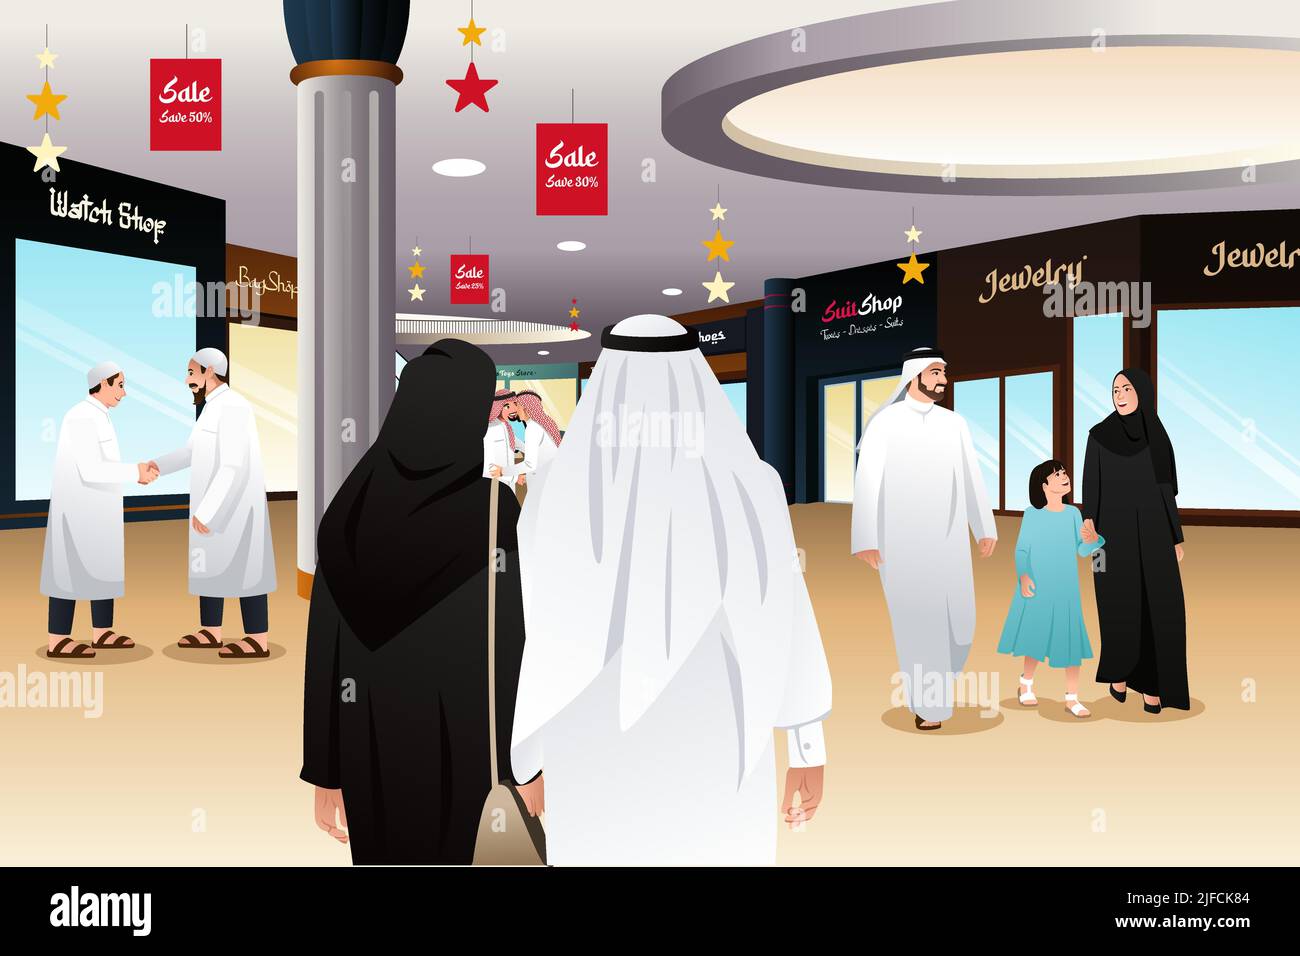 A vector illustration of Muslim People Shopping in a Mall Stock Vector